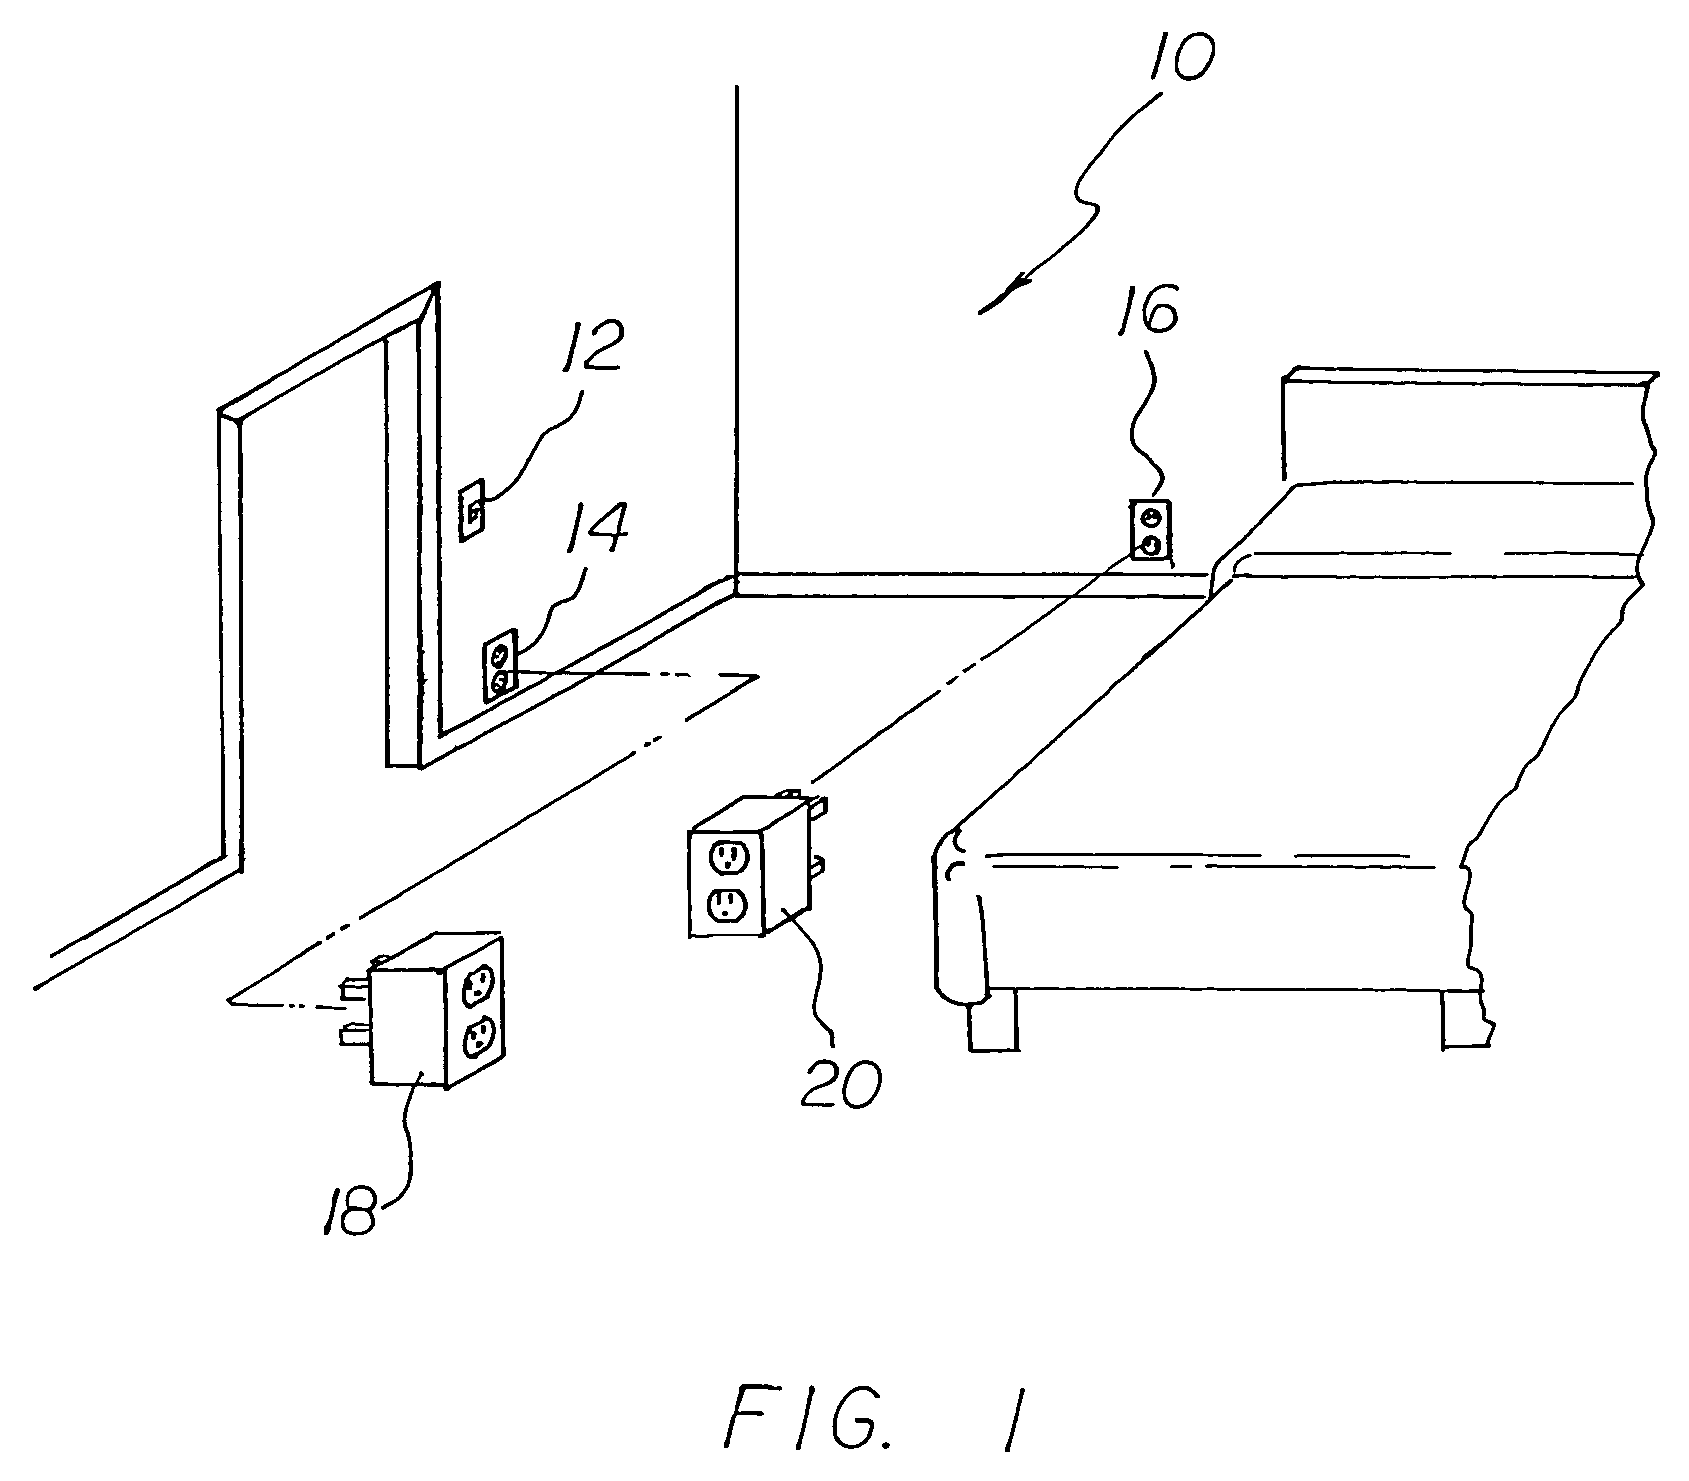 Apparatus for moving the effect of a wall switch from its switched power outlet to a non-switched outlet